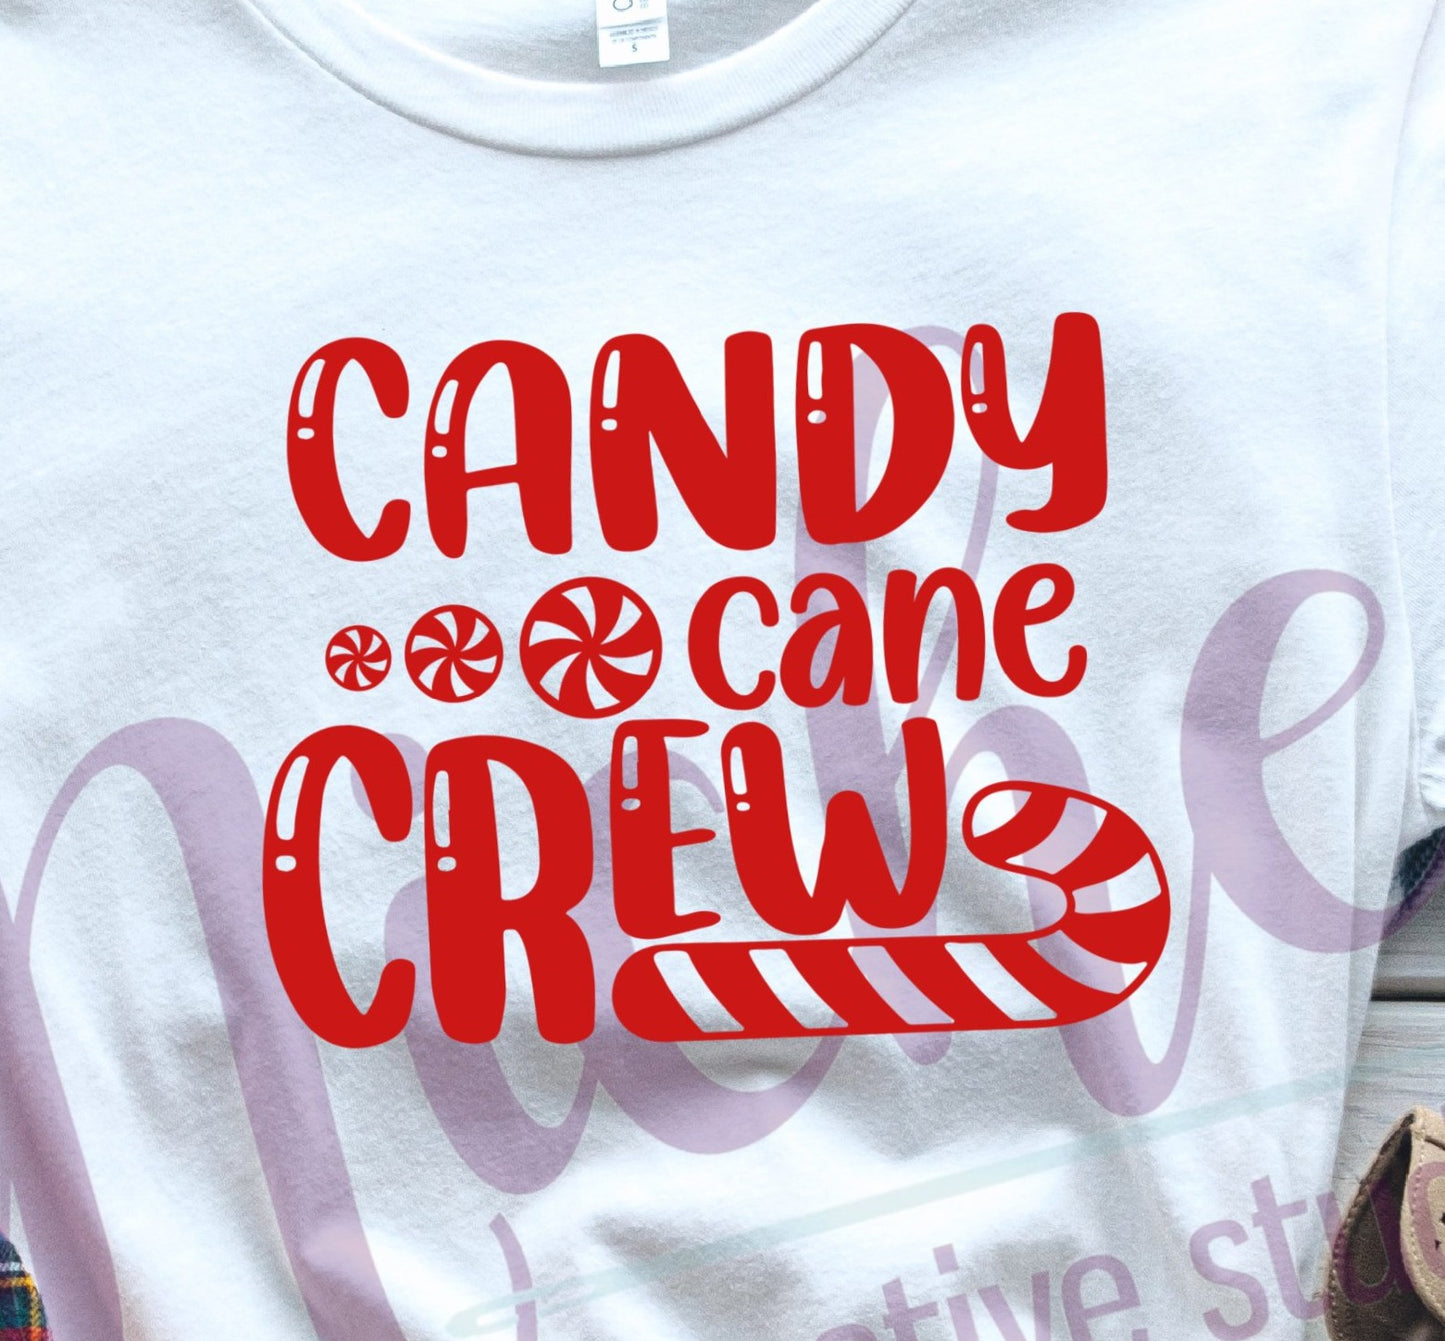 * Candy Cane Crew Decal